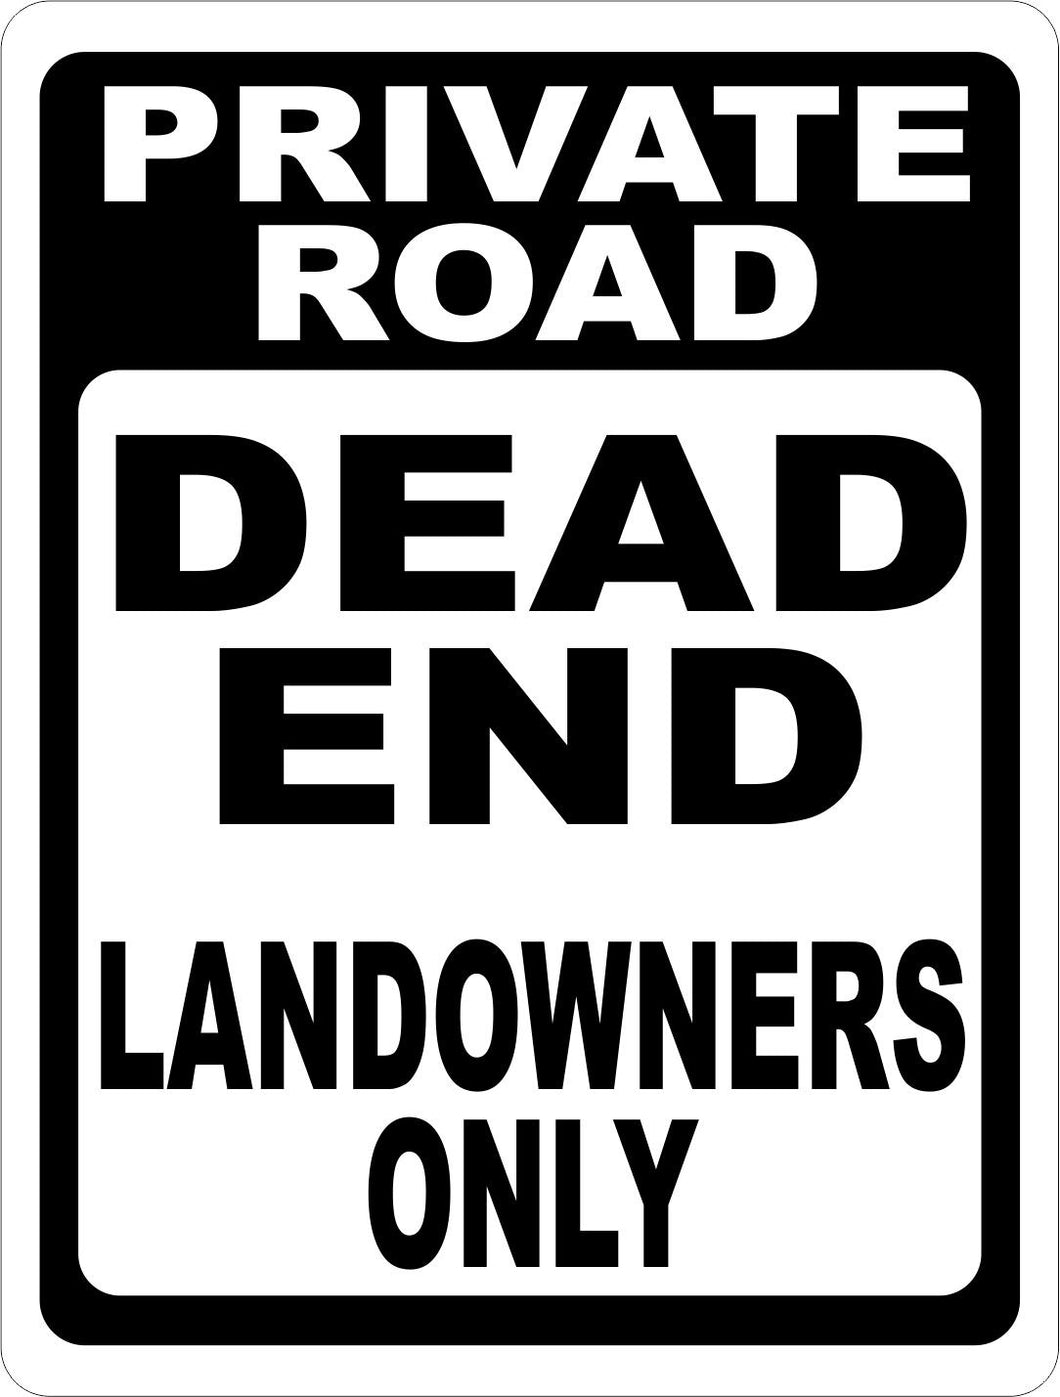 Private Road Dead End Land Owners Only Sign - Signs & Decals by SalaGraphics